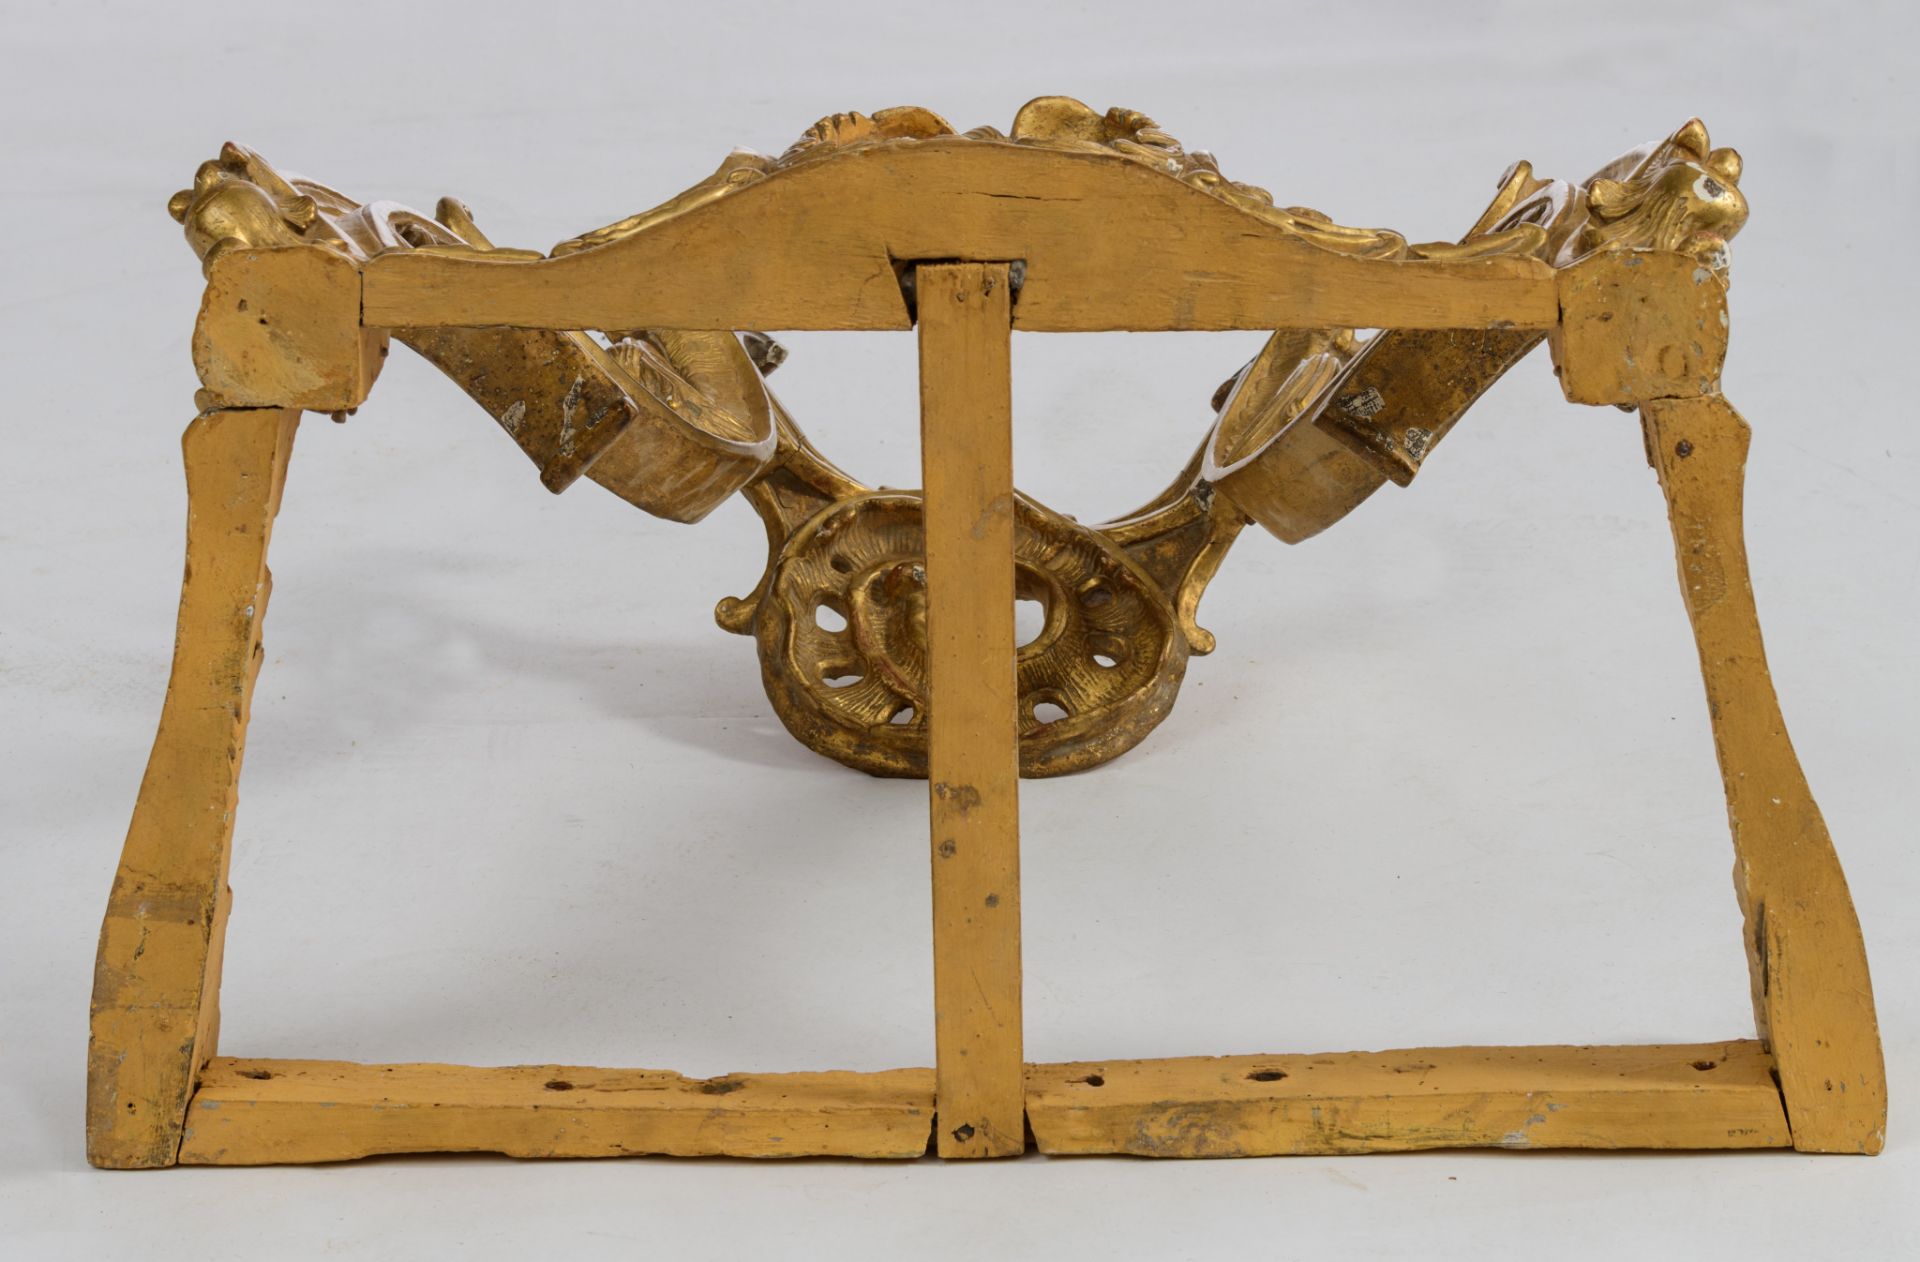 A richly carved giltwood Rococo console table, mid 18thC, H 83 - W 81,5 - D 48,5 cm - Image 10 of 11